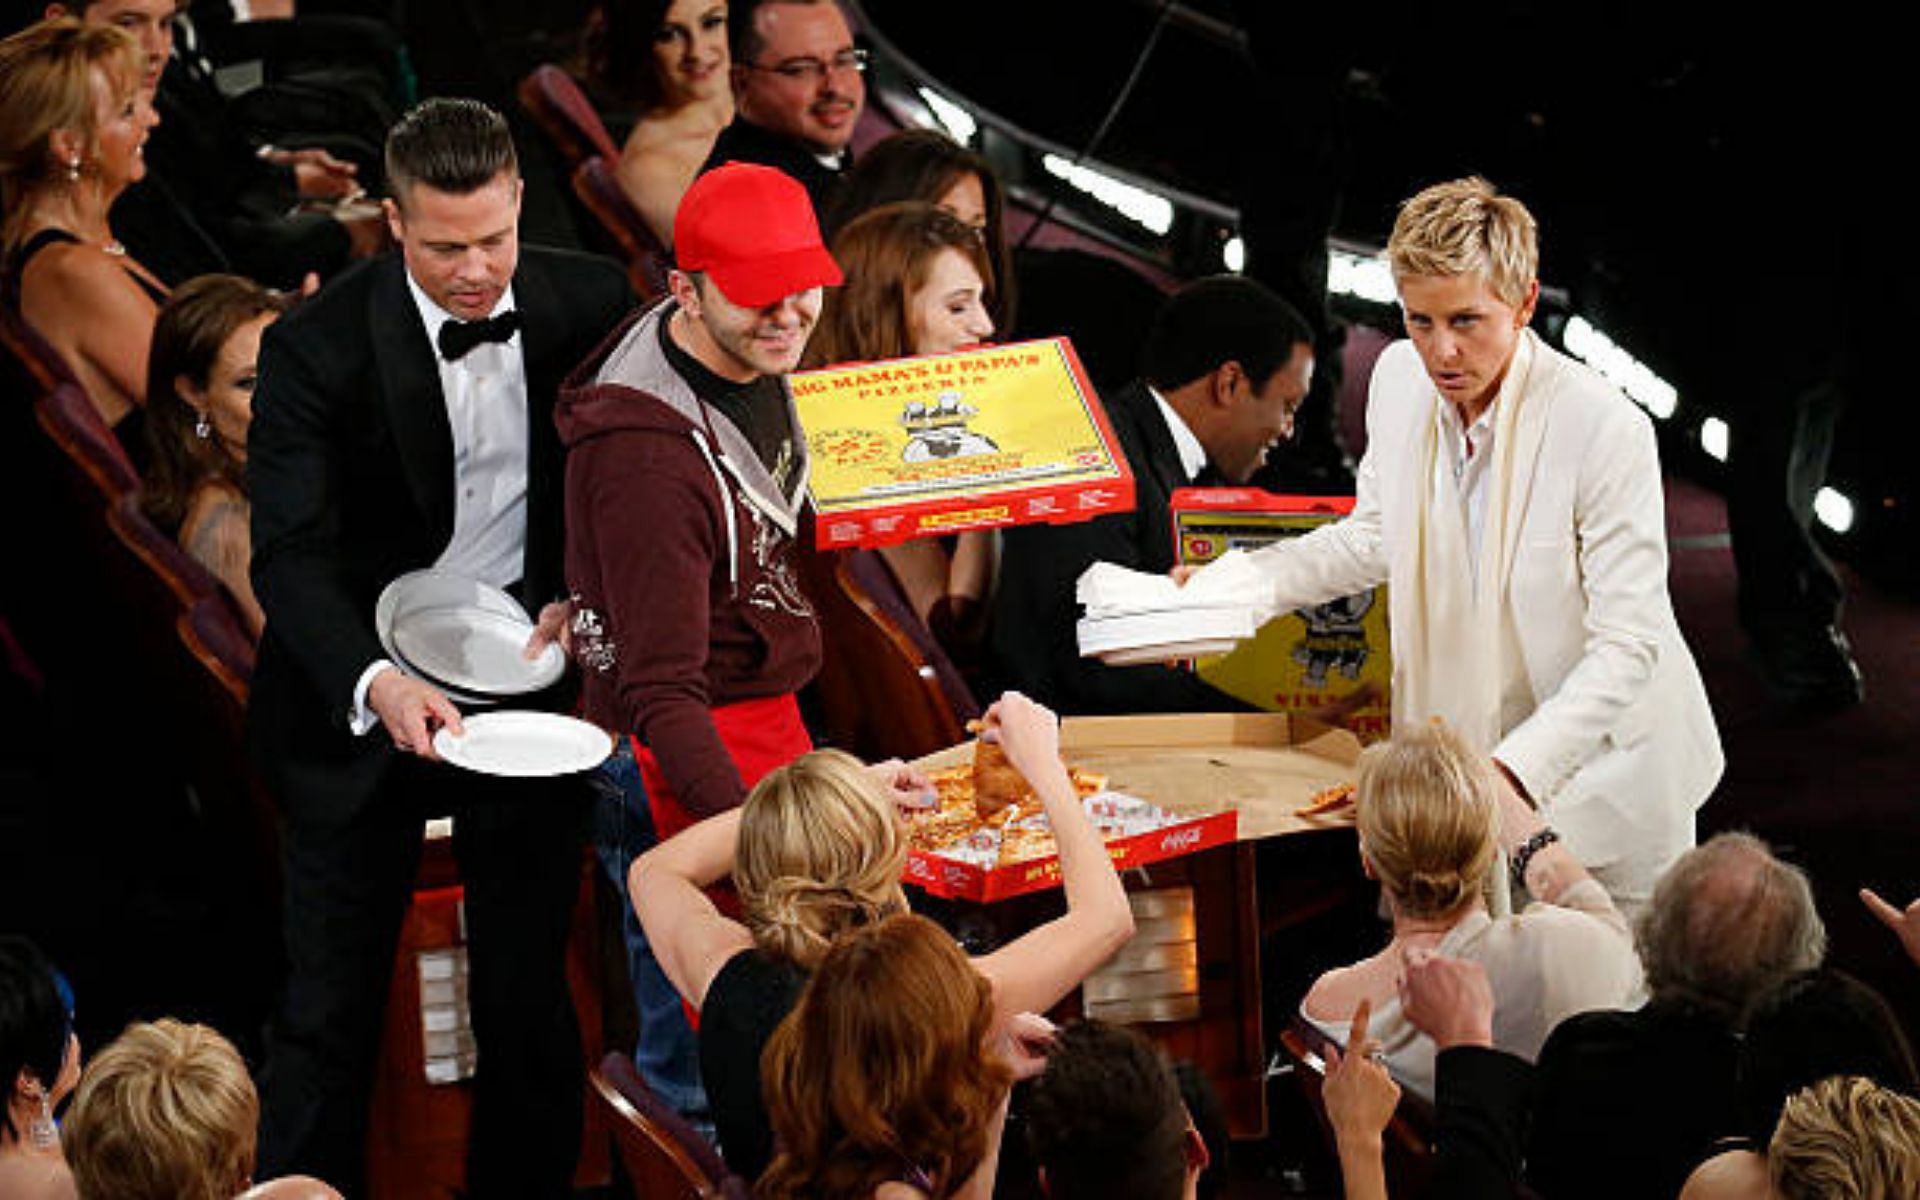 Ellen DeGeneres sharing pizza with celebrities at the 86th Annual Academy Awards (Image via Getty Images)